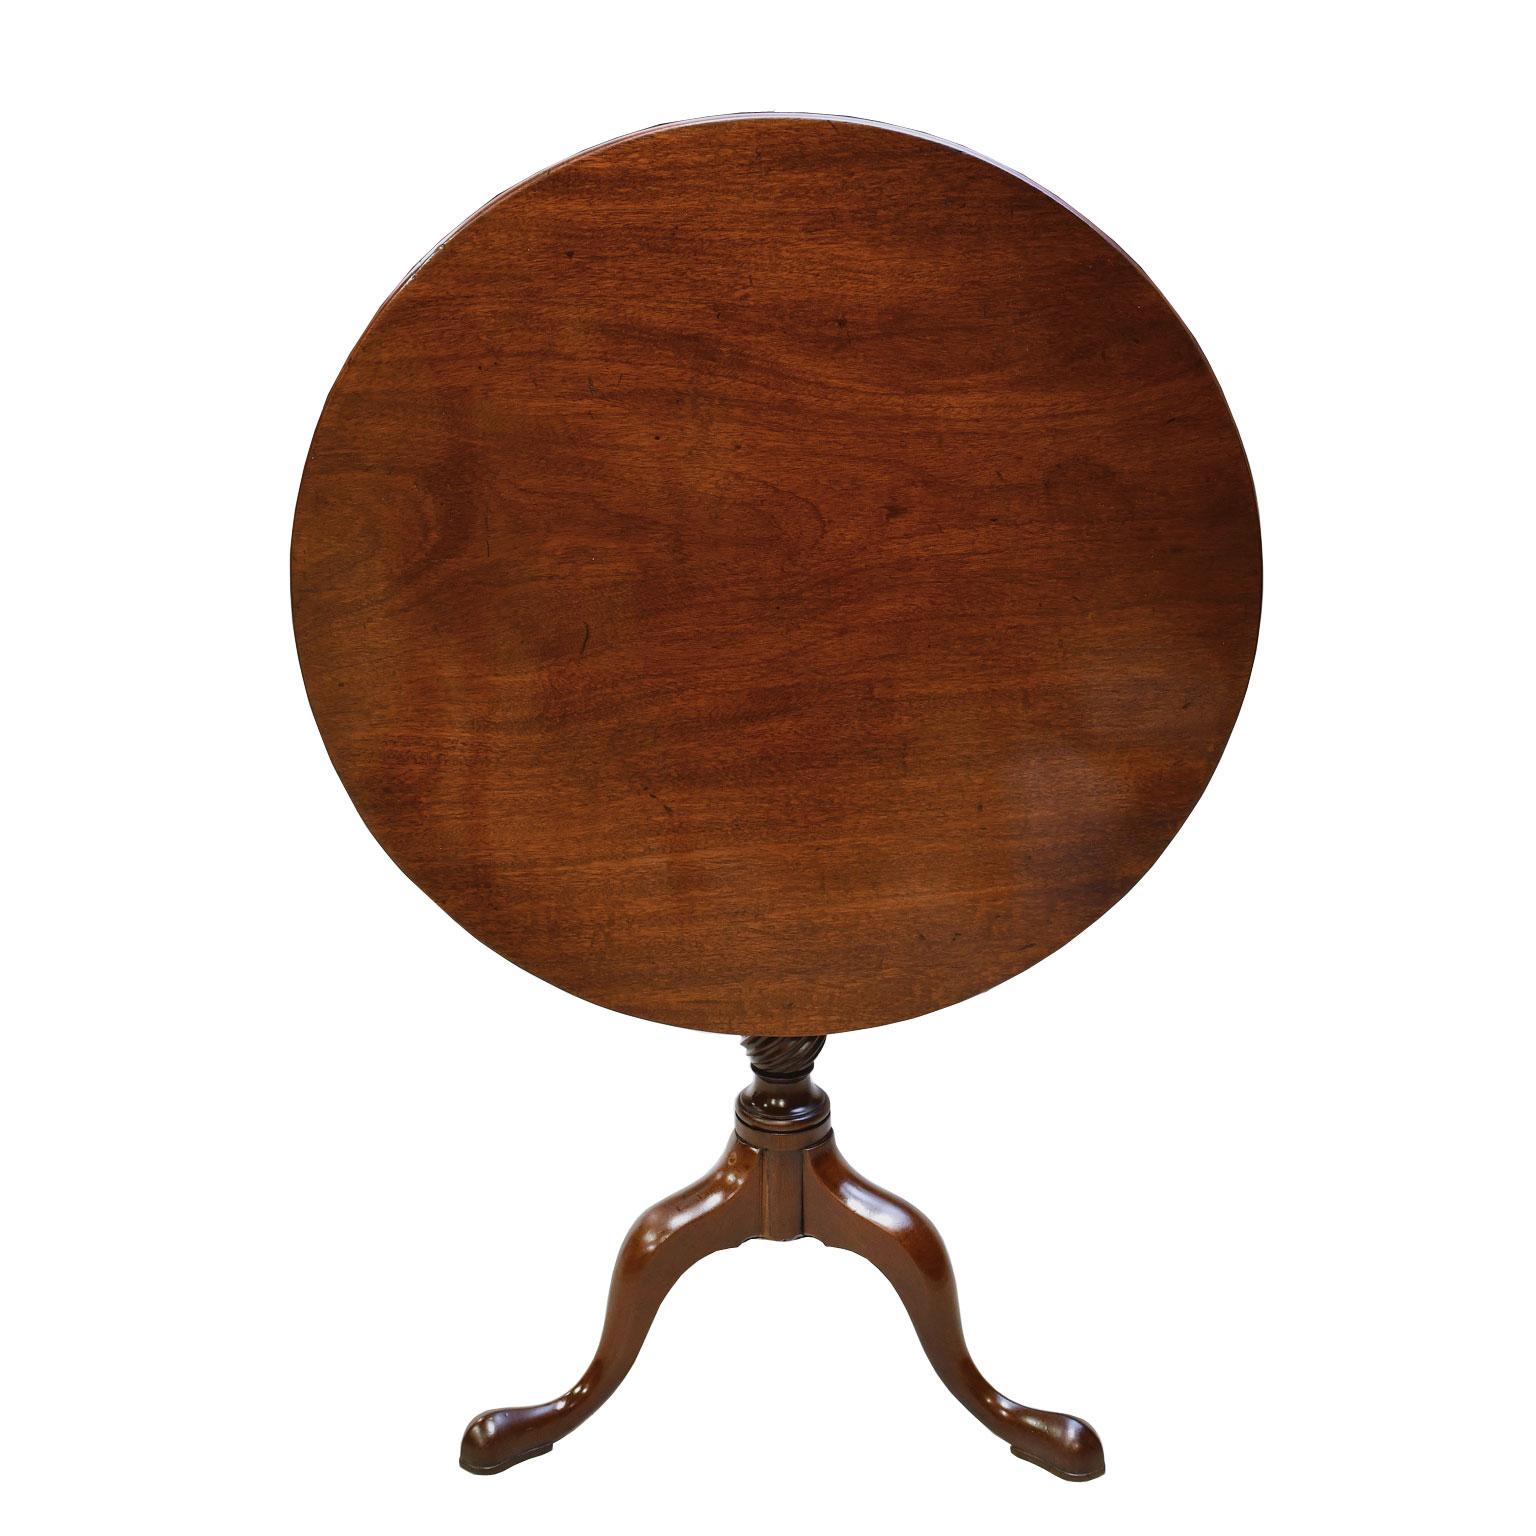 A lovely American Queen Ann style tea table in mahogany with one-piece round tilt-top on a spiral-vase turned column resting on three out-swept cabriole legs on Dutch snake head feet. New England, circa 1790
Measures: 29 1/2